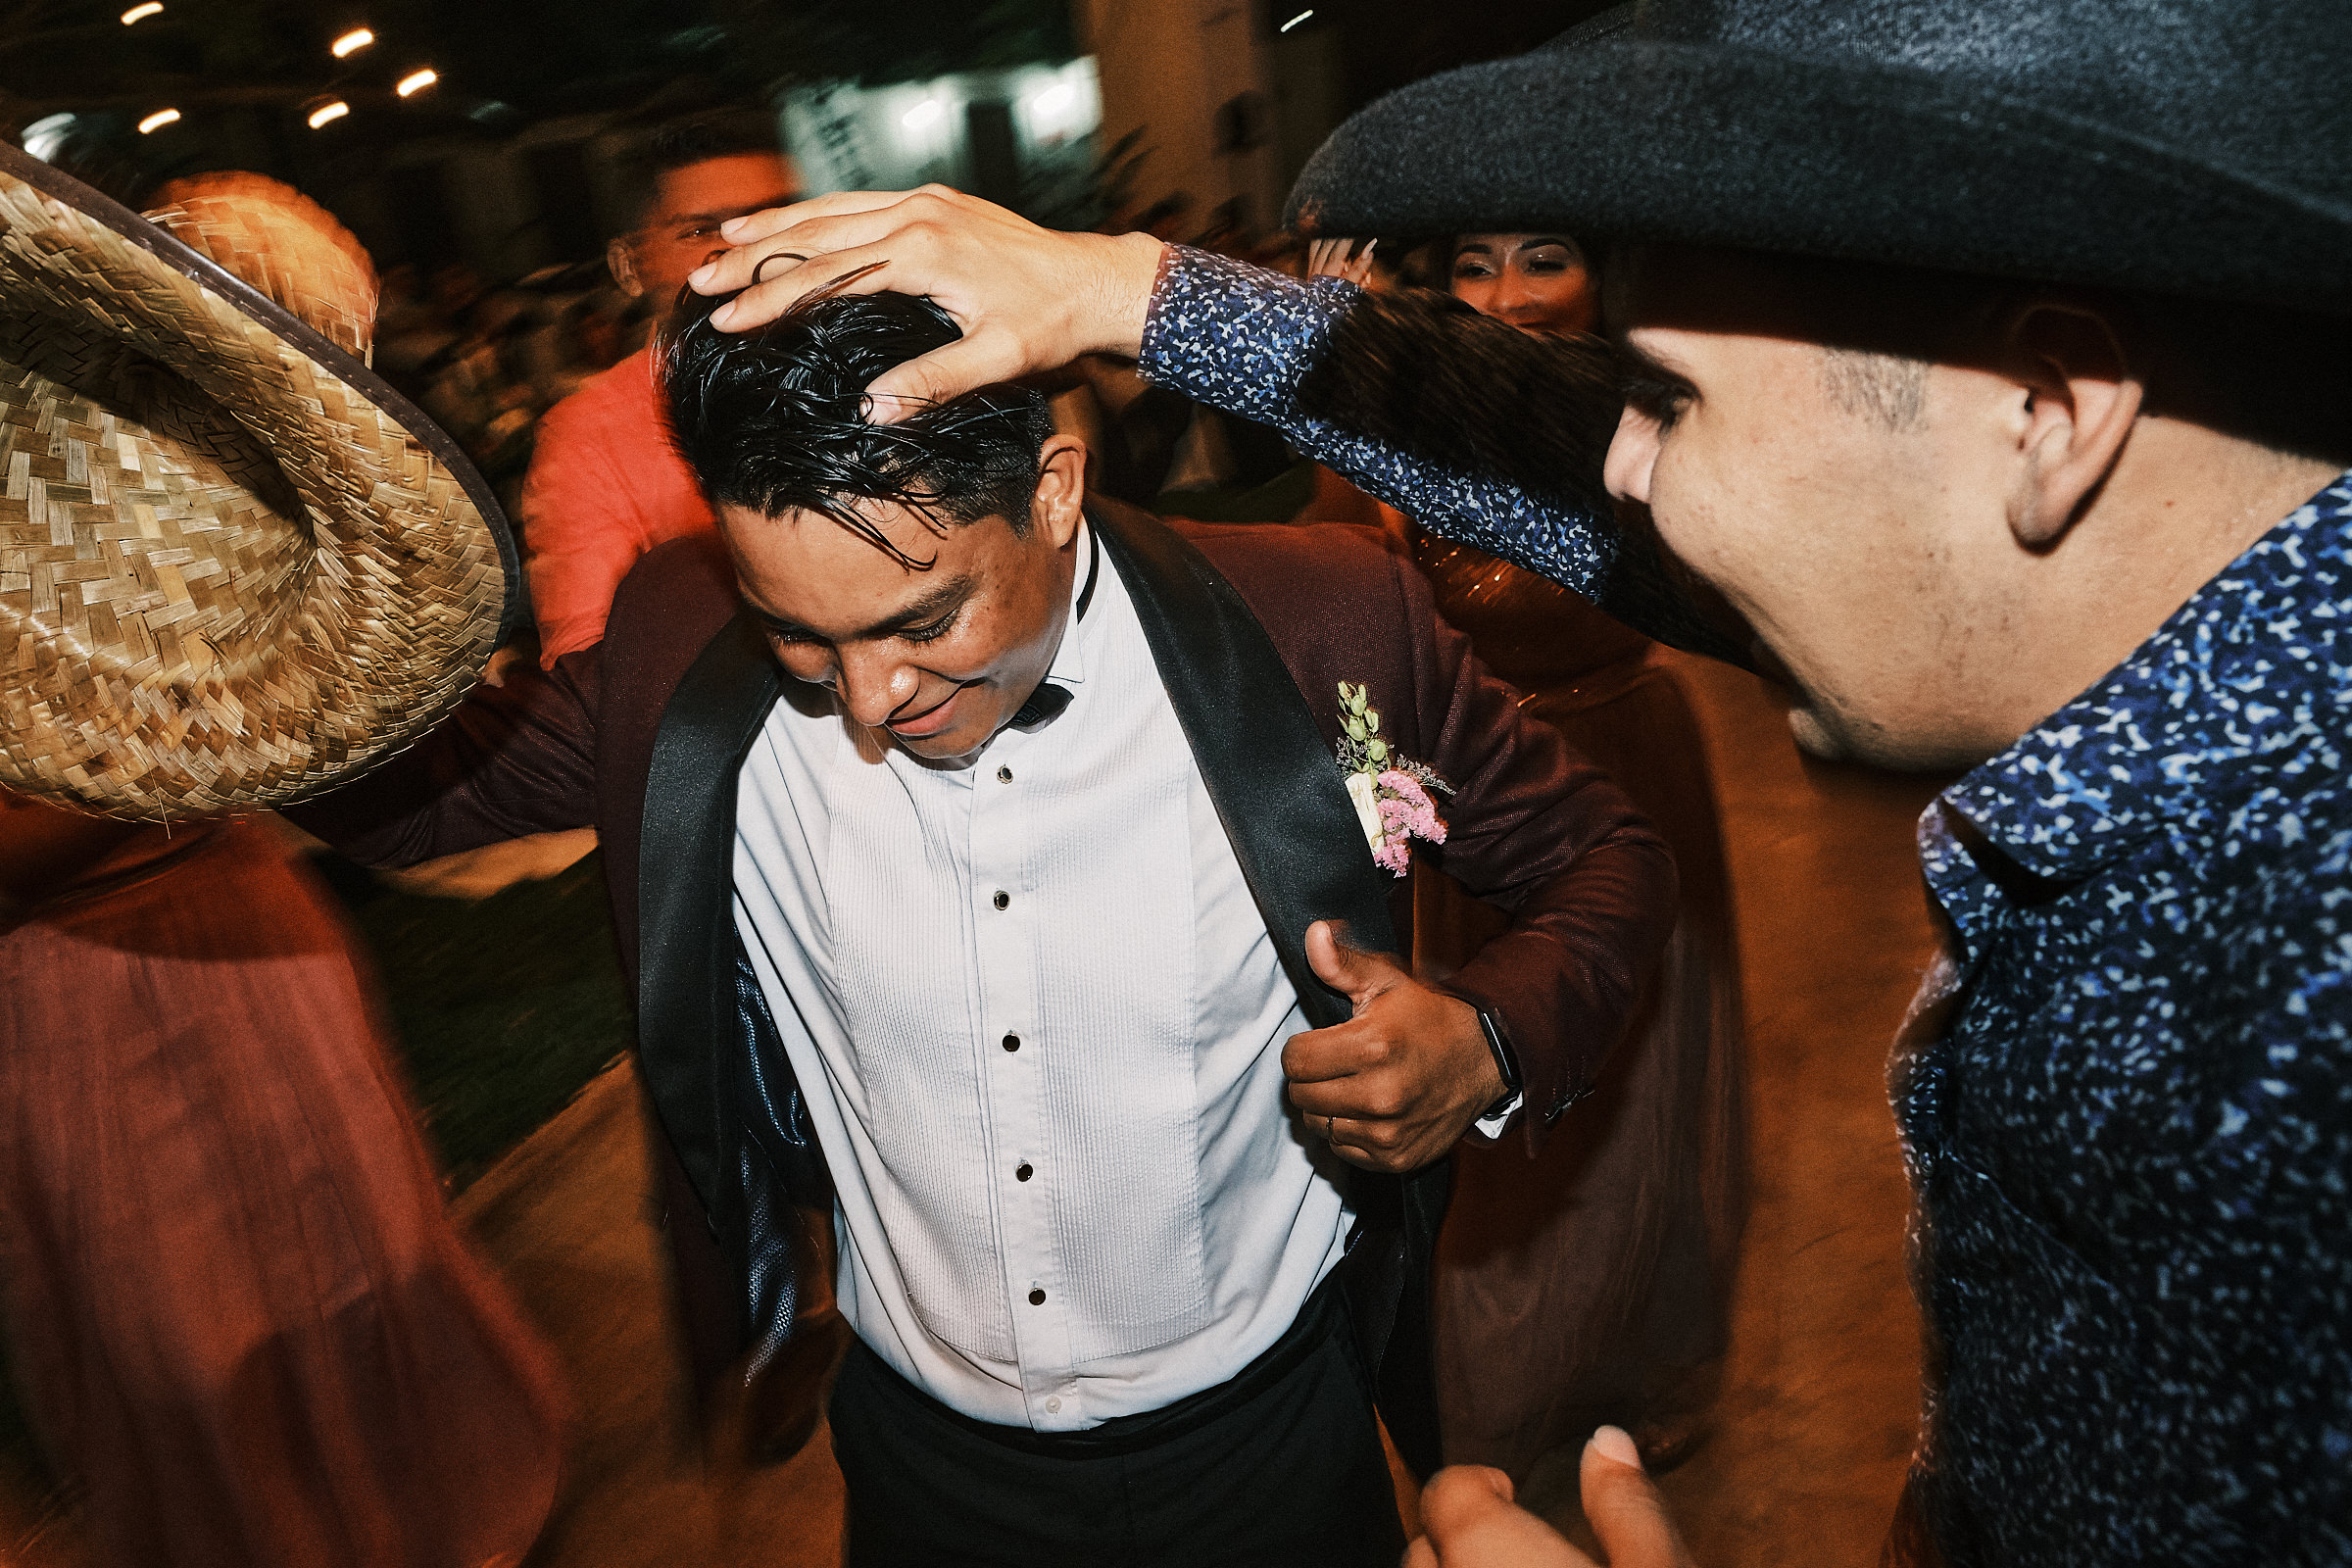 Groom Dances And Is Frozen In Motion As Everything Else Continues Moving